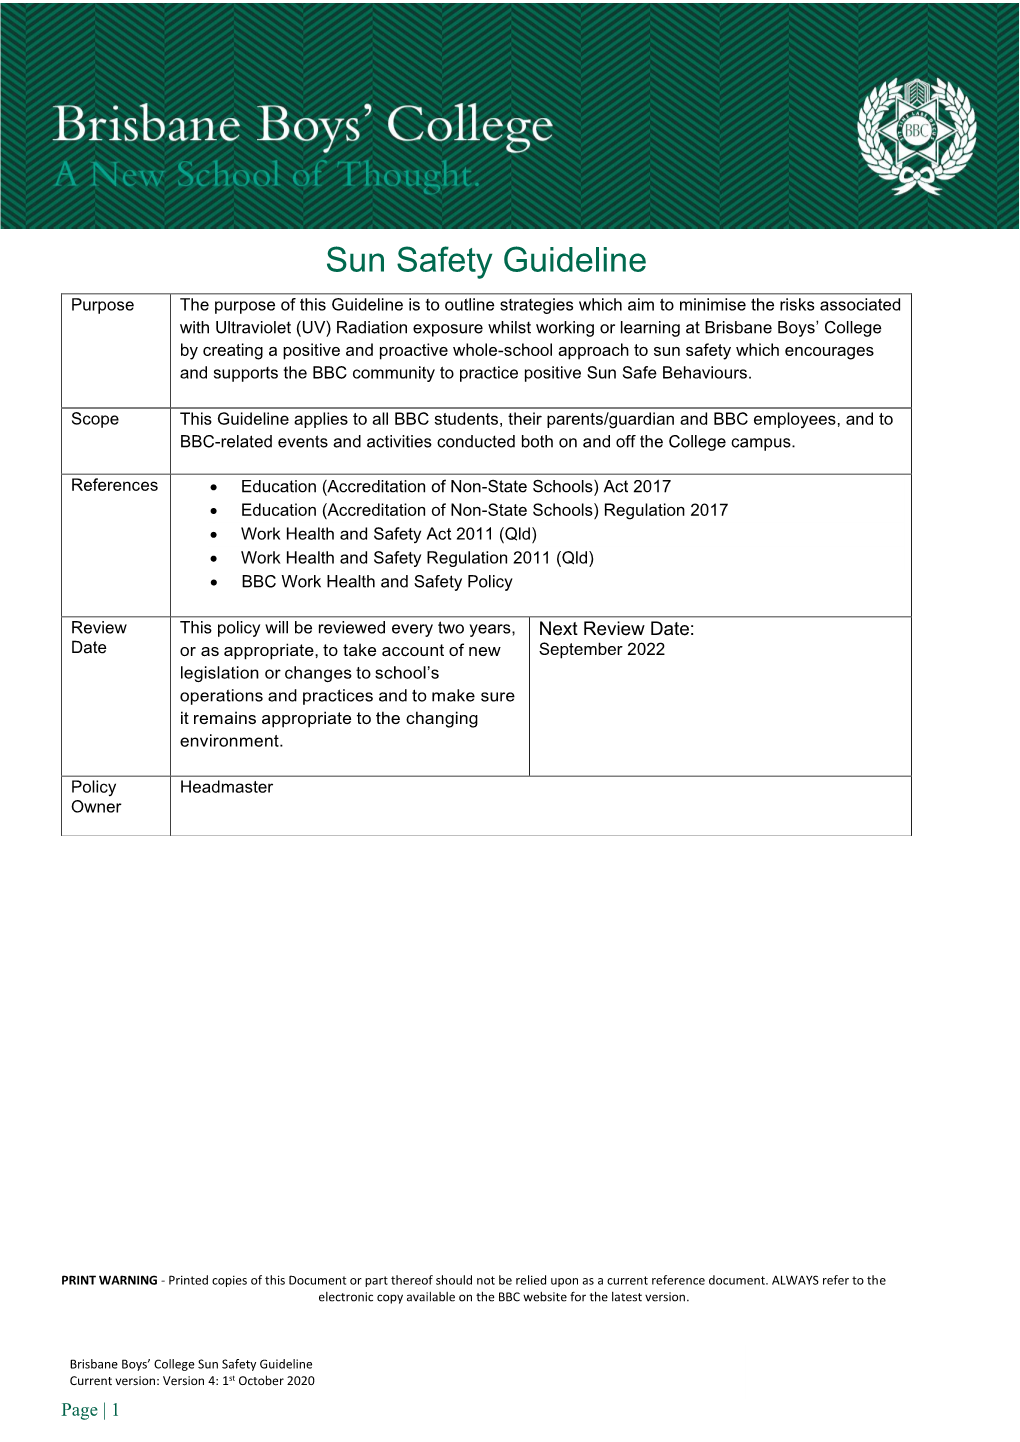 Sun Safety Guideline